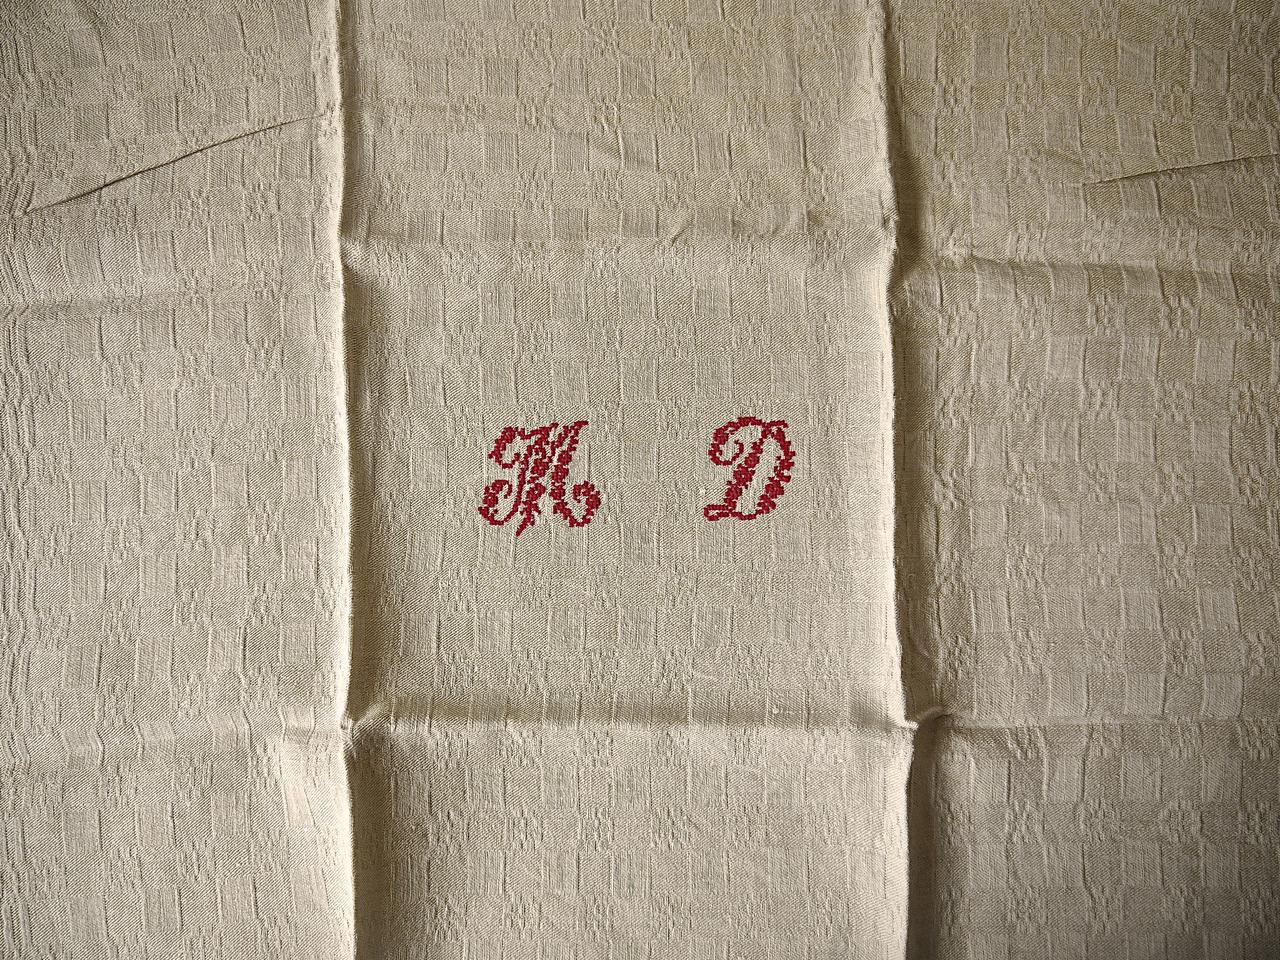 Set of ten late 19th century French napkins monogrammed in red stitching with the letters MD on a heavy natural linen with an interesting weave. In a unused washed perfect condition.